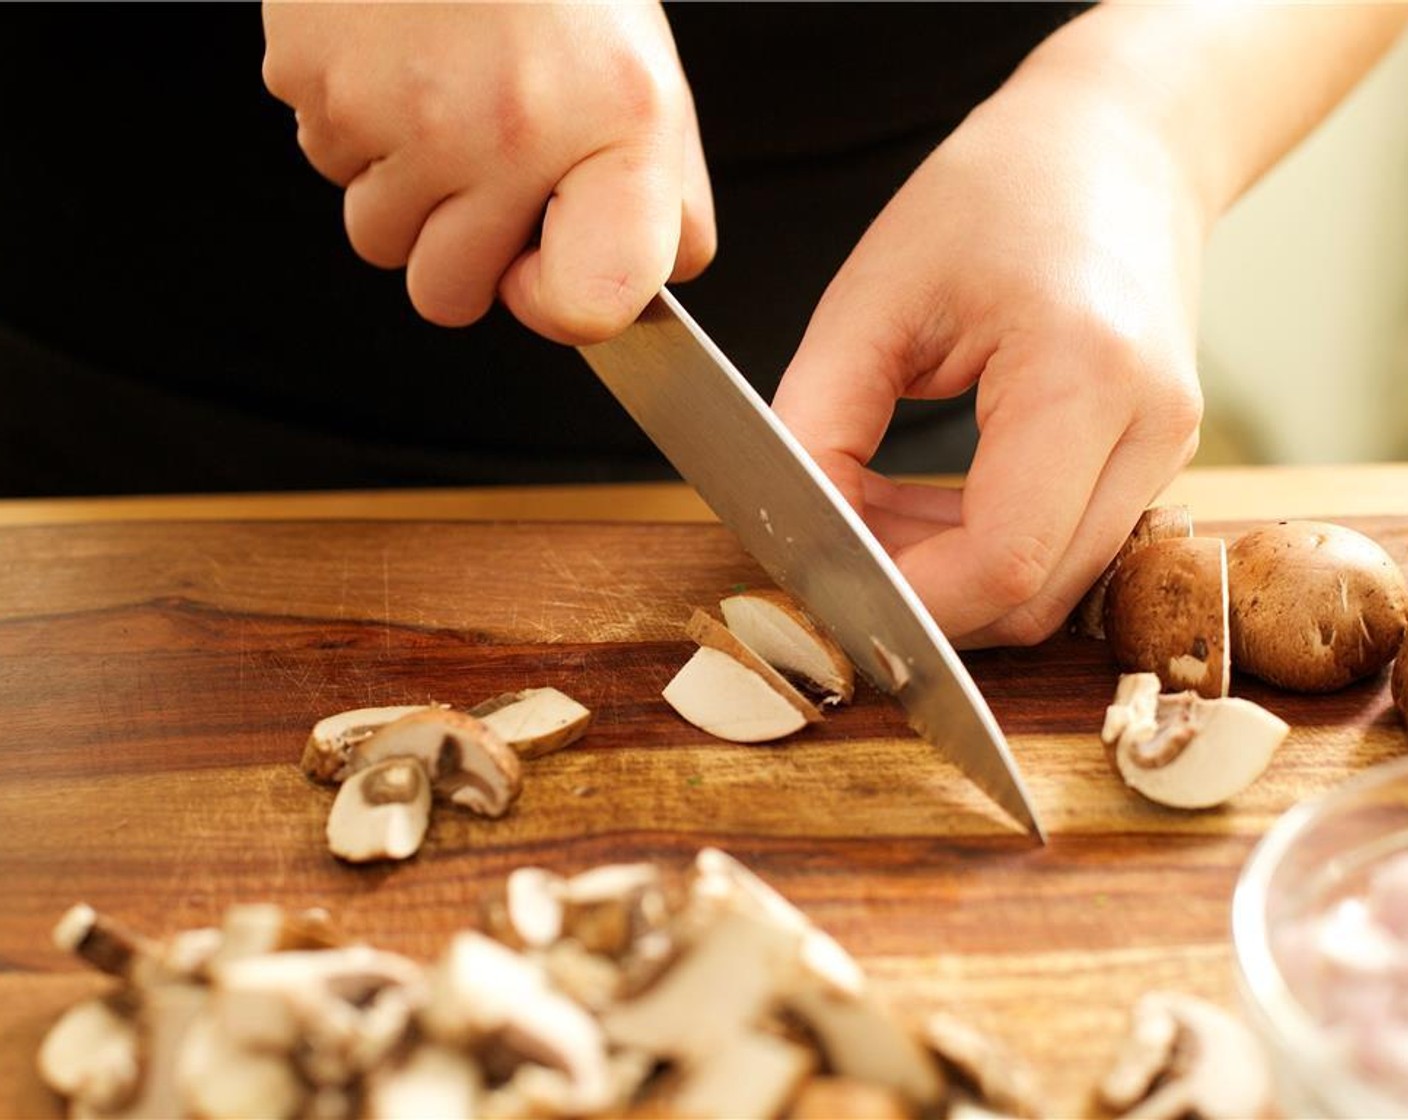 step 5 Slice mushrooms in half, and cut each slice into pieces a quarter inch thick.